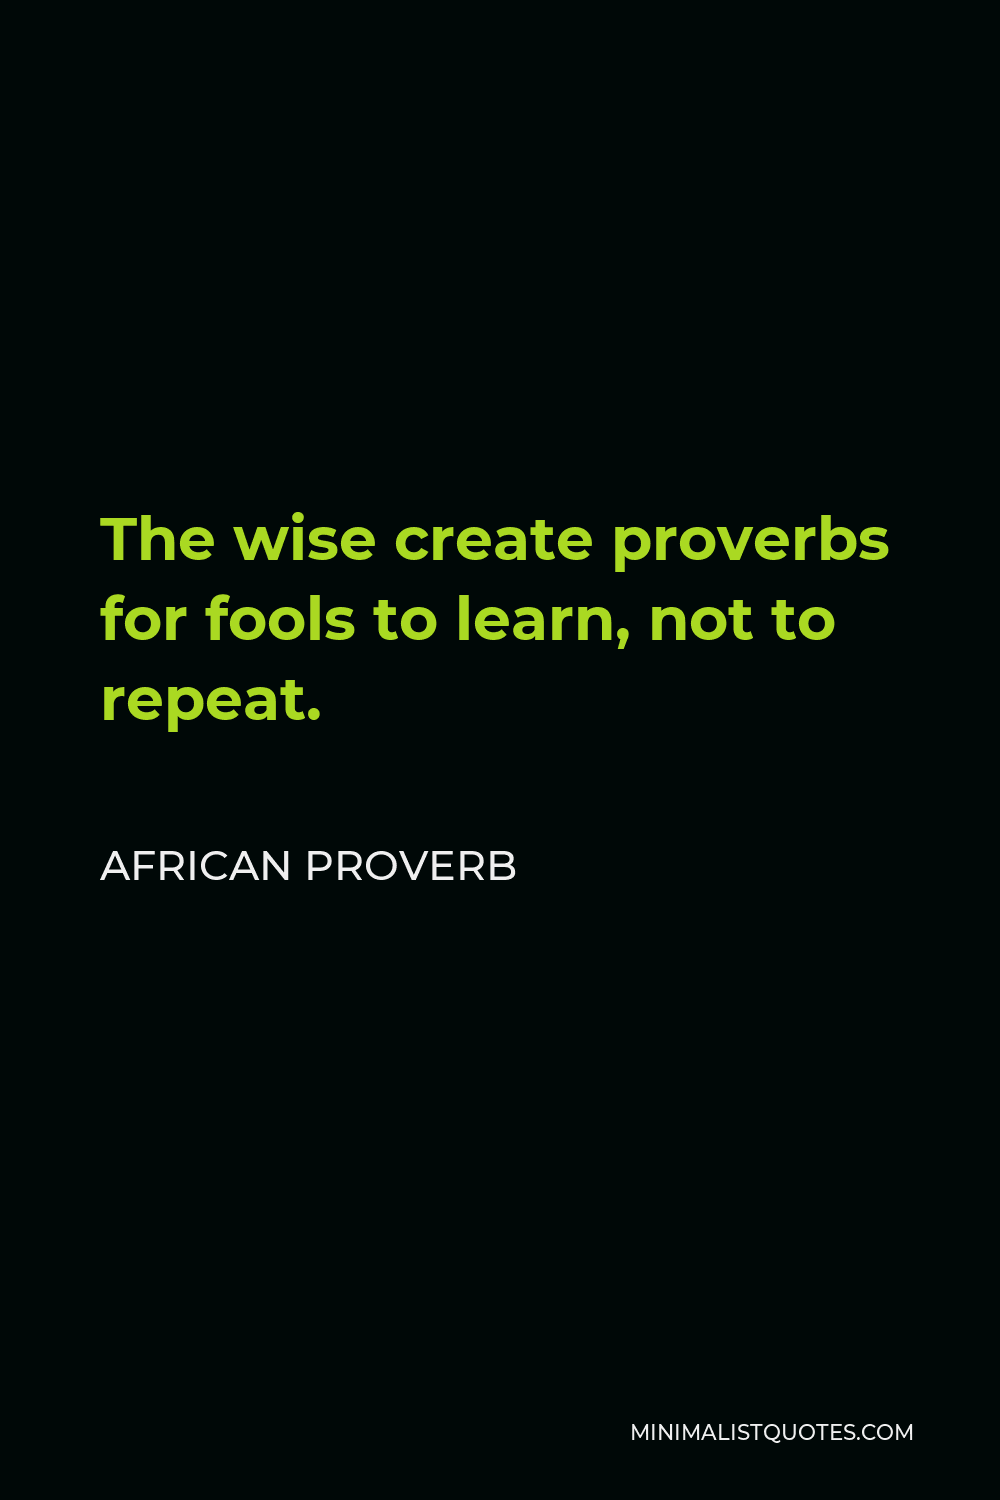 African Proverb Quote - The wise create proverbs for fools to learn, not to repeat.